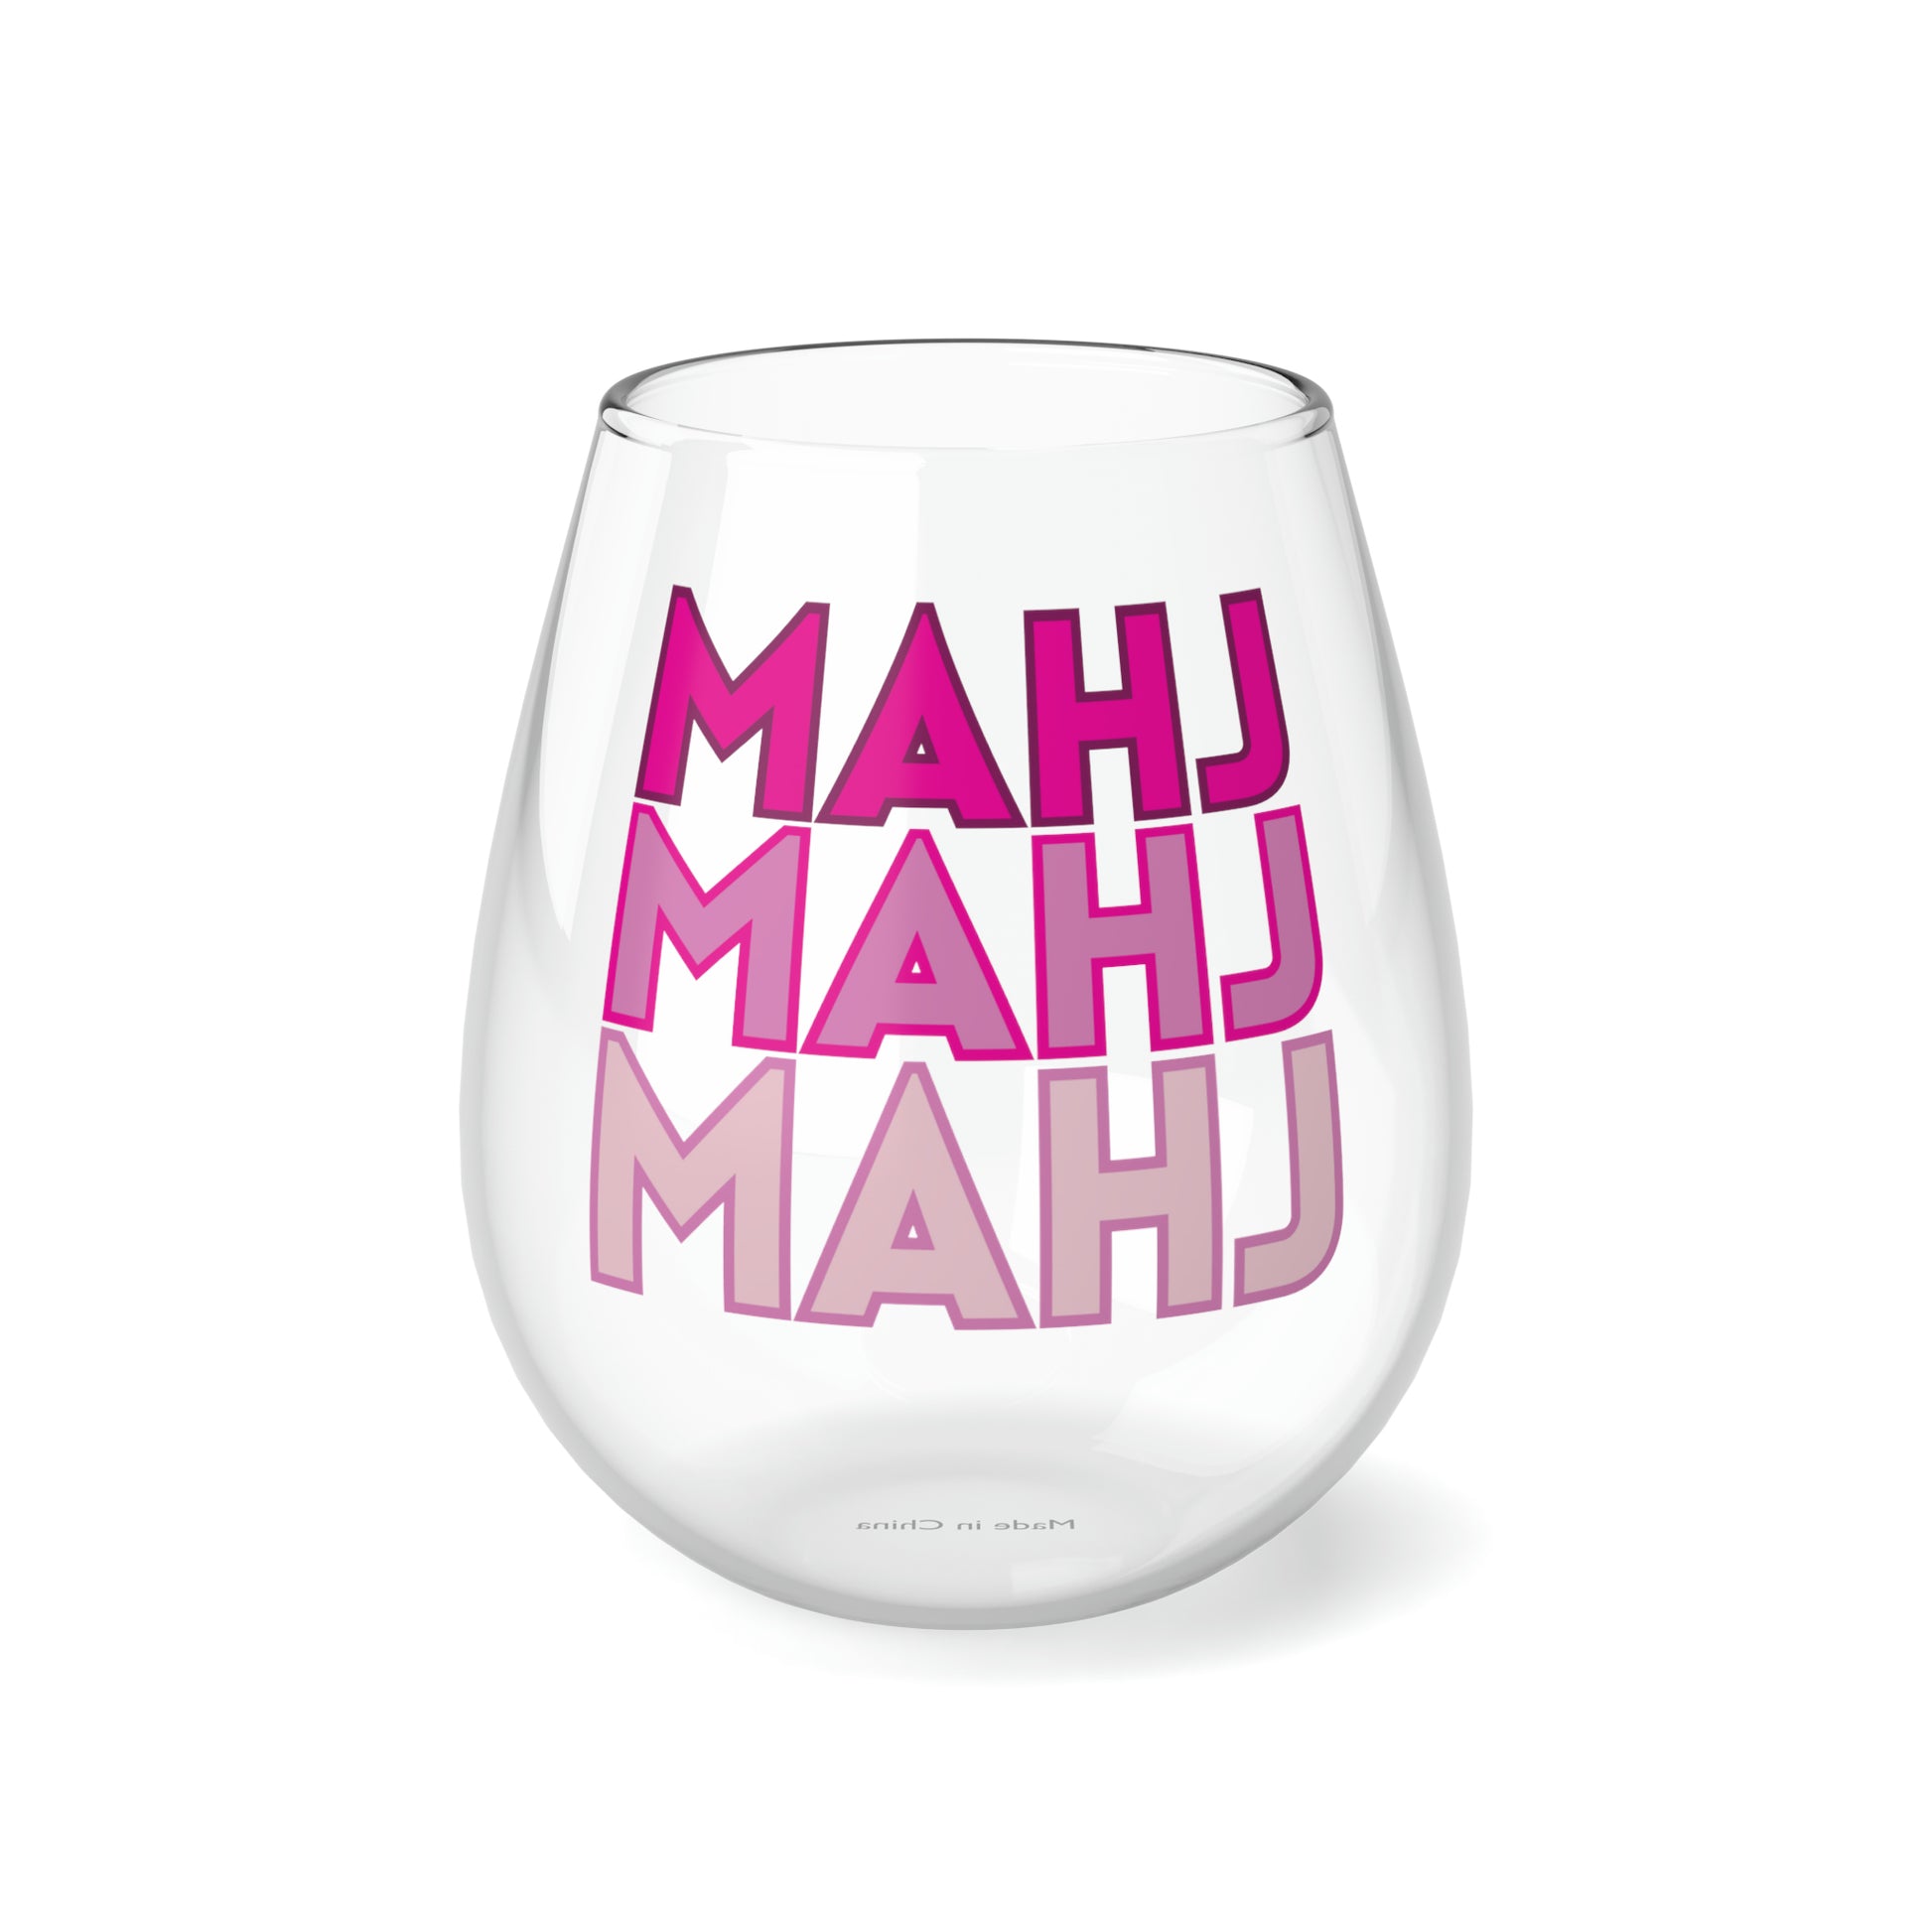 Mahjong Wine glasses Set of 4 Mahjongg Gift for MAHJ Party Game Tiles-Crack Bam Dot-Bright Colors Pink Blue Yellow Green Colors